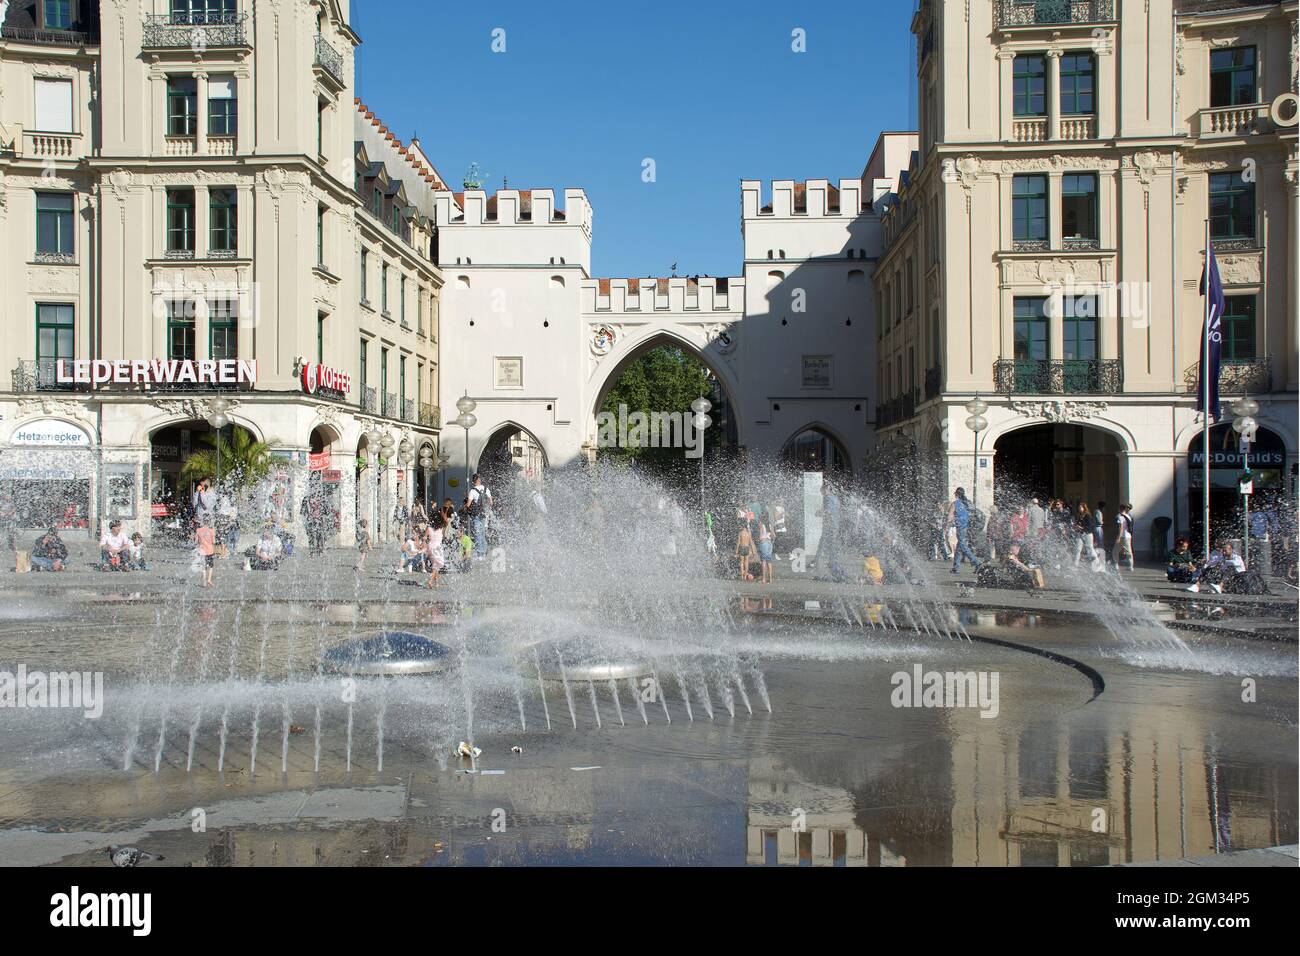 Karlstor gate from the 18th century in the old town of Munich with people in the pedestrian zone- Germany. Stock Photo